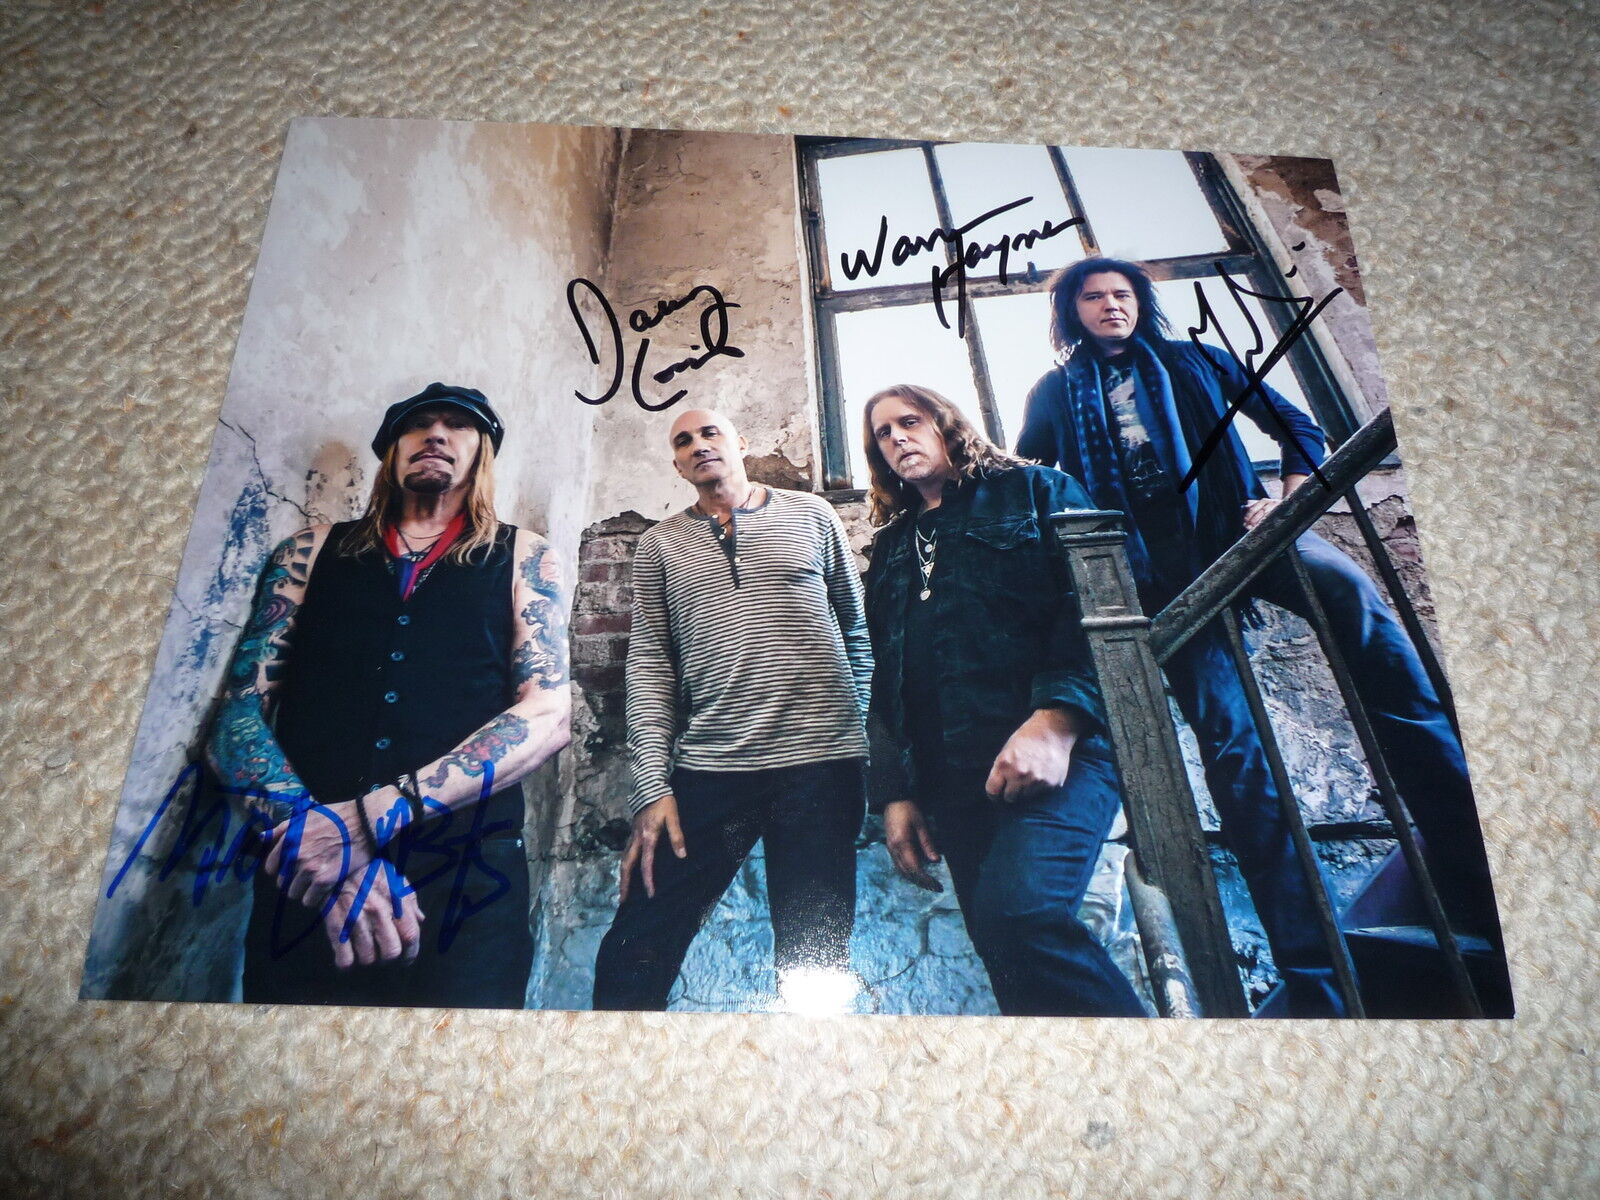 GOV'T MULE signed autograph In Person 8x10 (20x25 cm) full band WARREN HAYNES